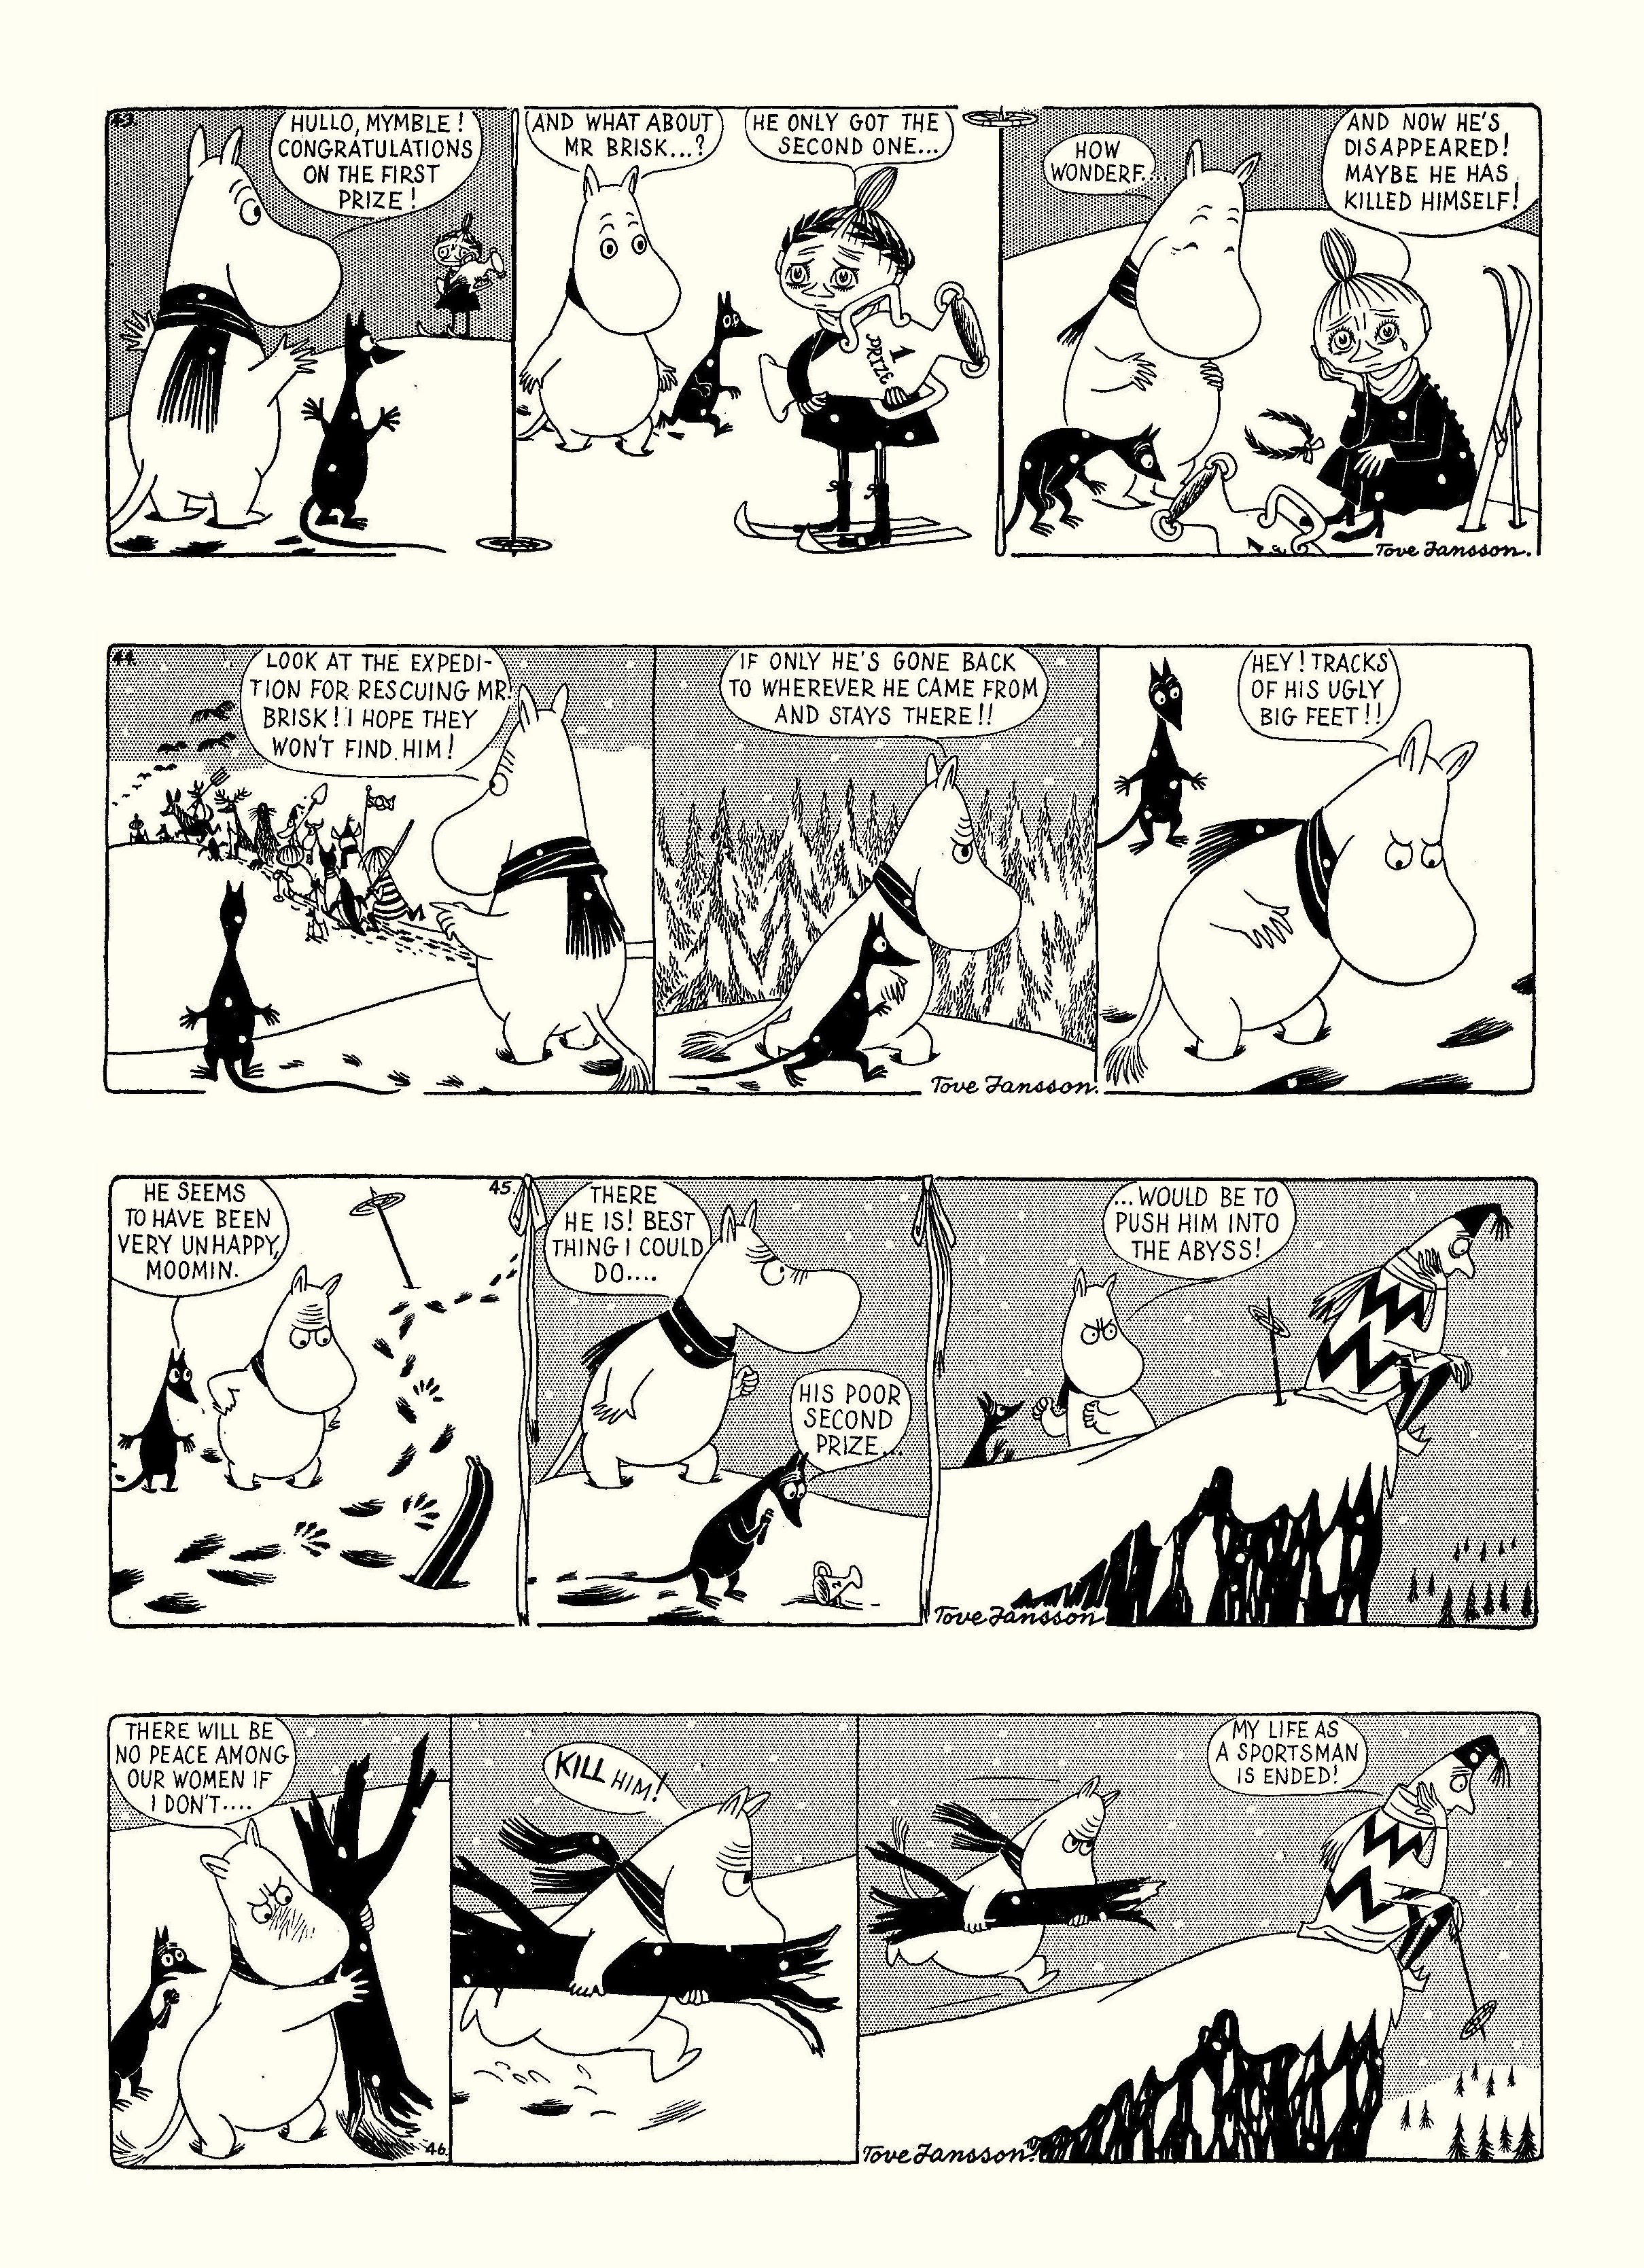 Read online Moomin: The Complete Tove Jansson Comic Strip comic -  Issue # TPB 2 - 17